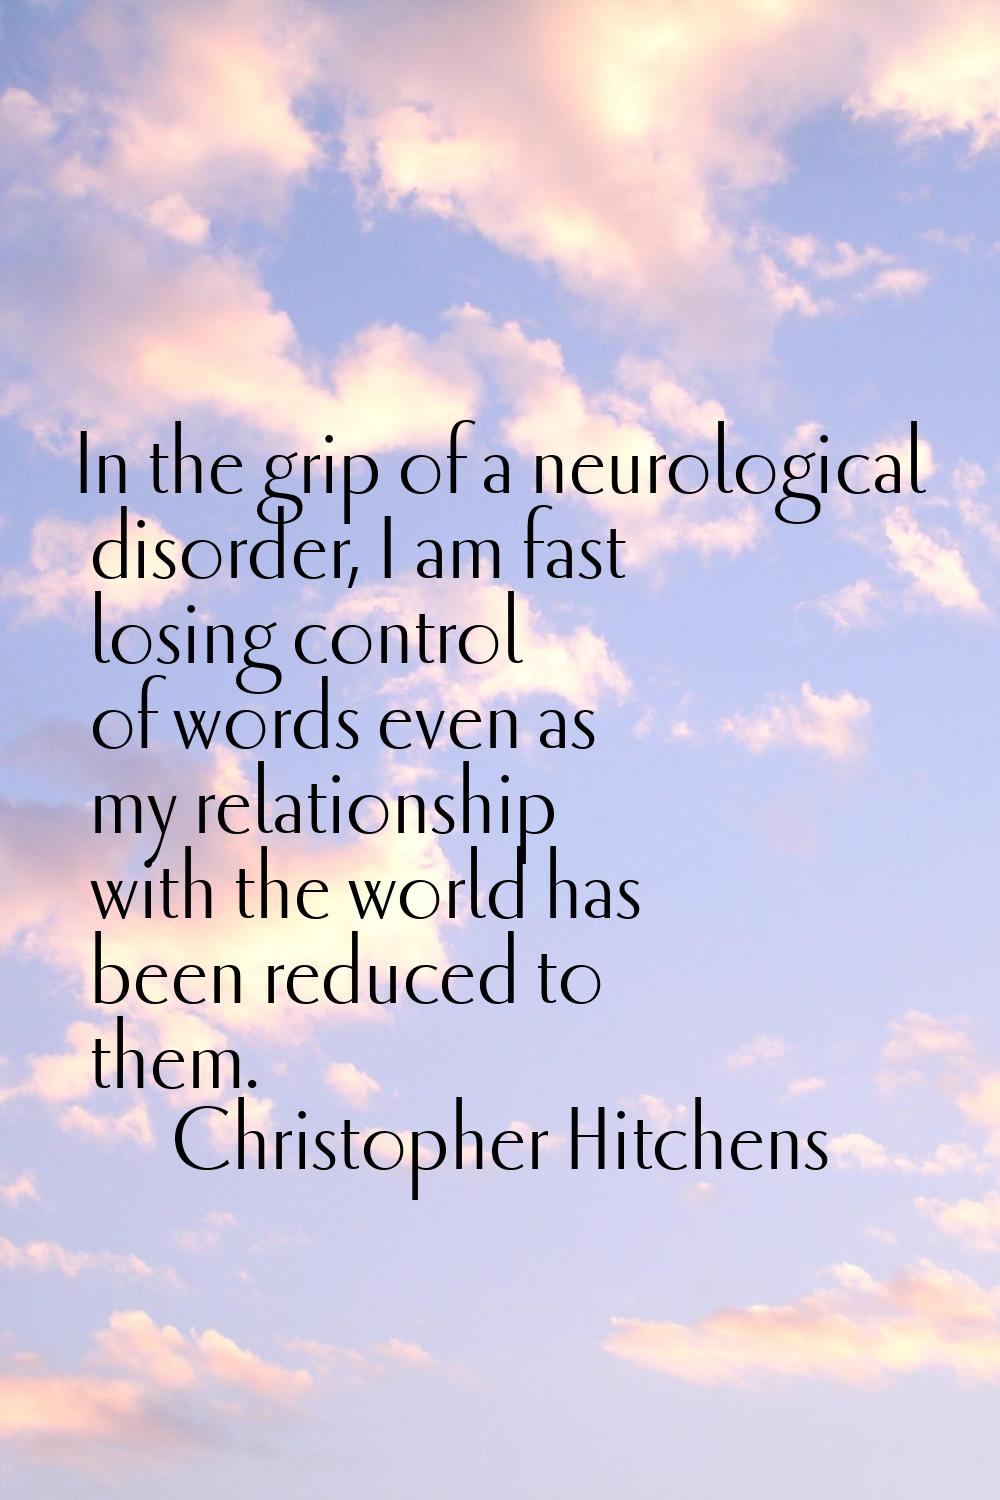 In the grip of a neurological disorder, I am fast losing control of words even as my relationship w